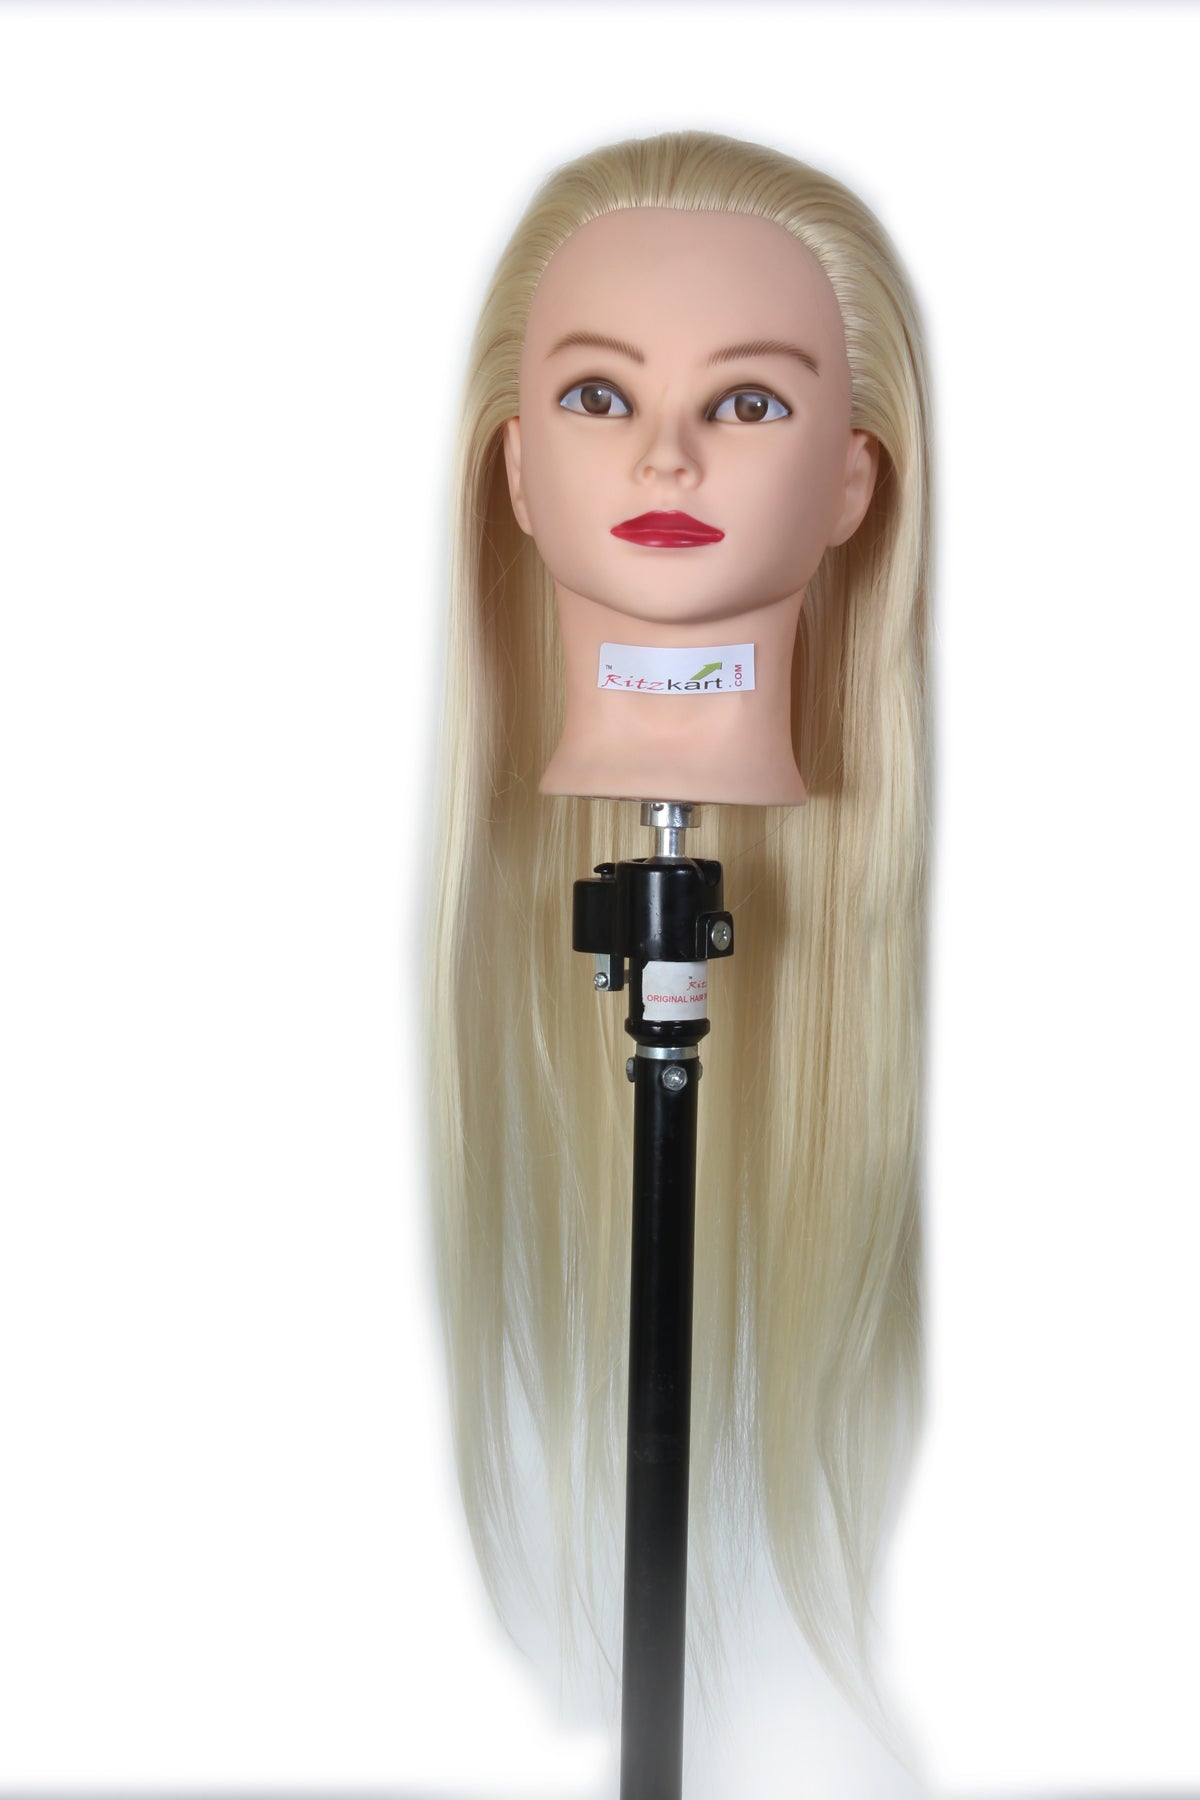 Ritzkart Imported Synthetic Hair practice Dummy Feel Natural soft Hair Off White hair long dummy for Practice/Cutting/styling/mannequin For Trainers (white dummy).